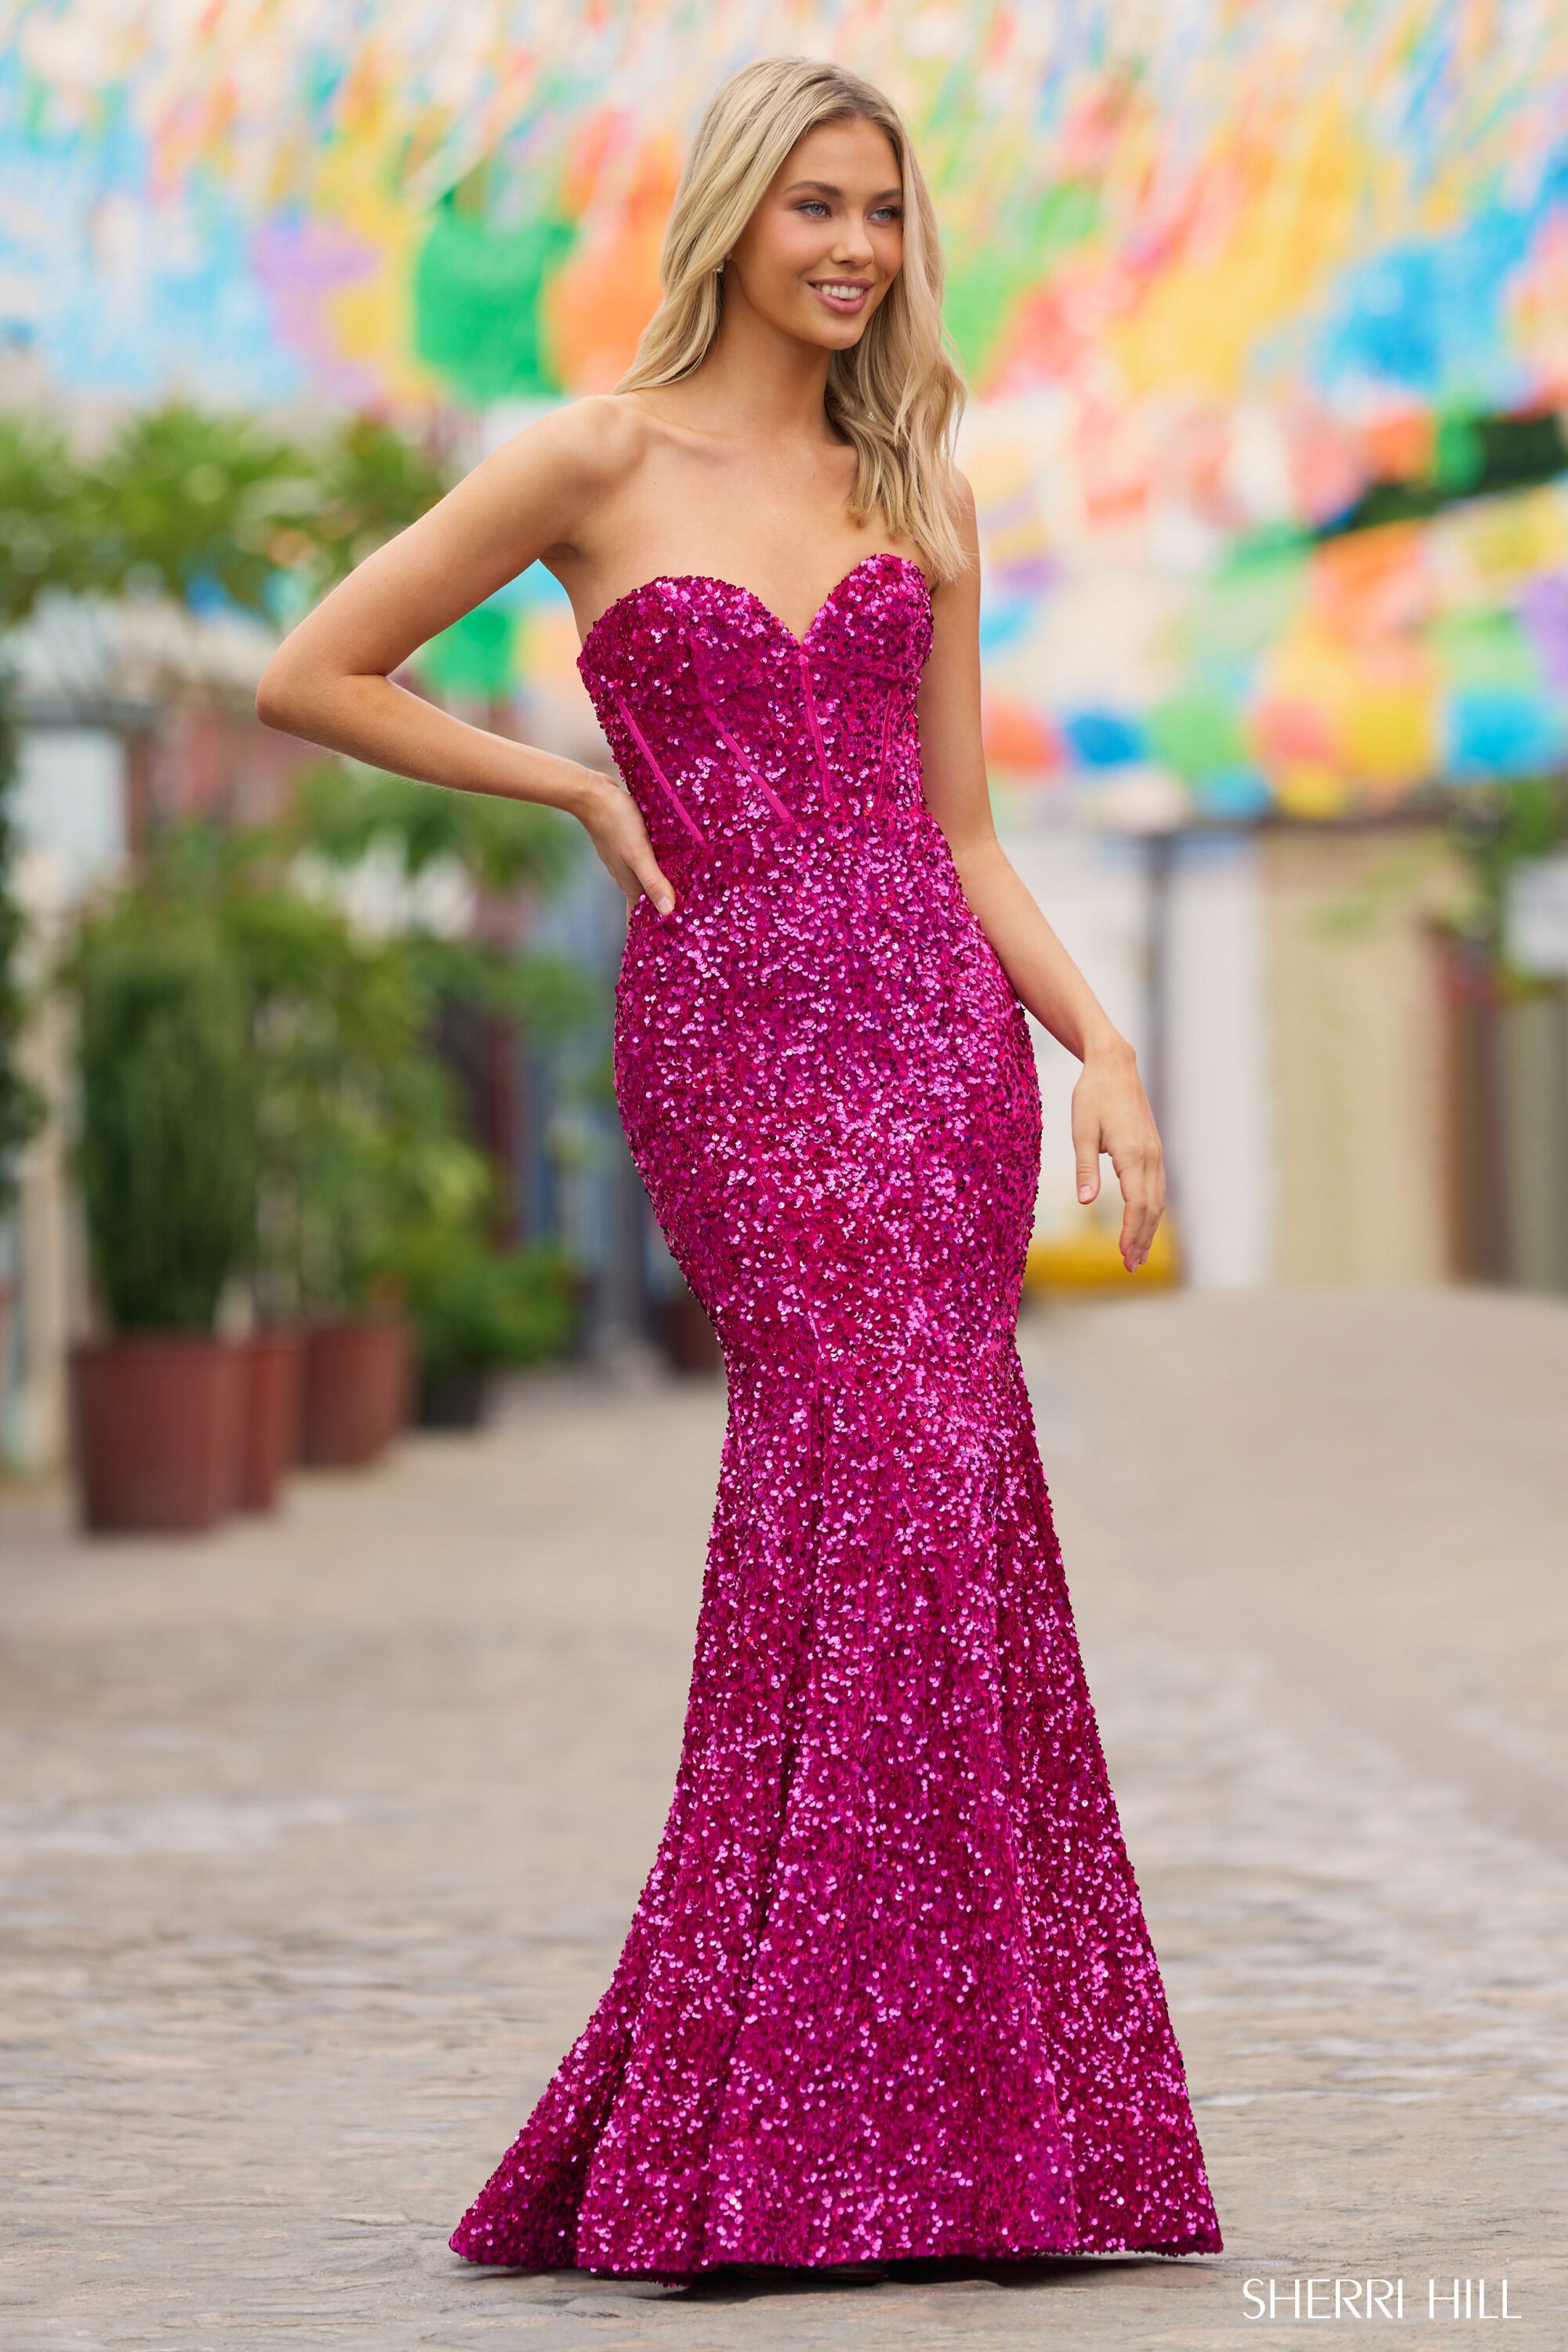 Shop for the Latest Jovani Prom Dresses! - The Dress Outlet